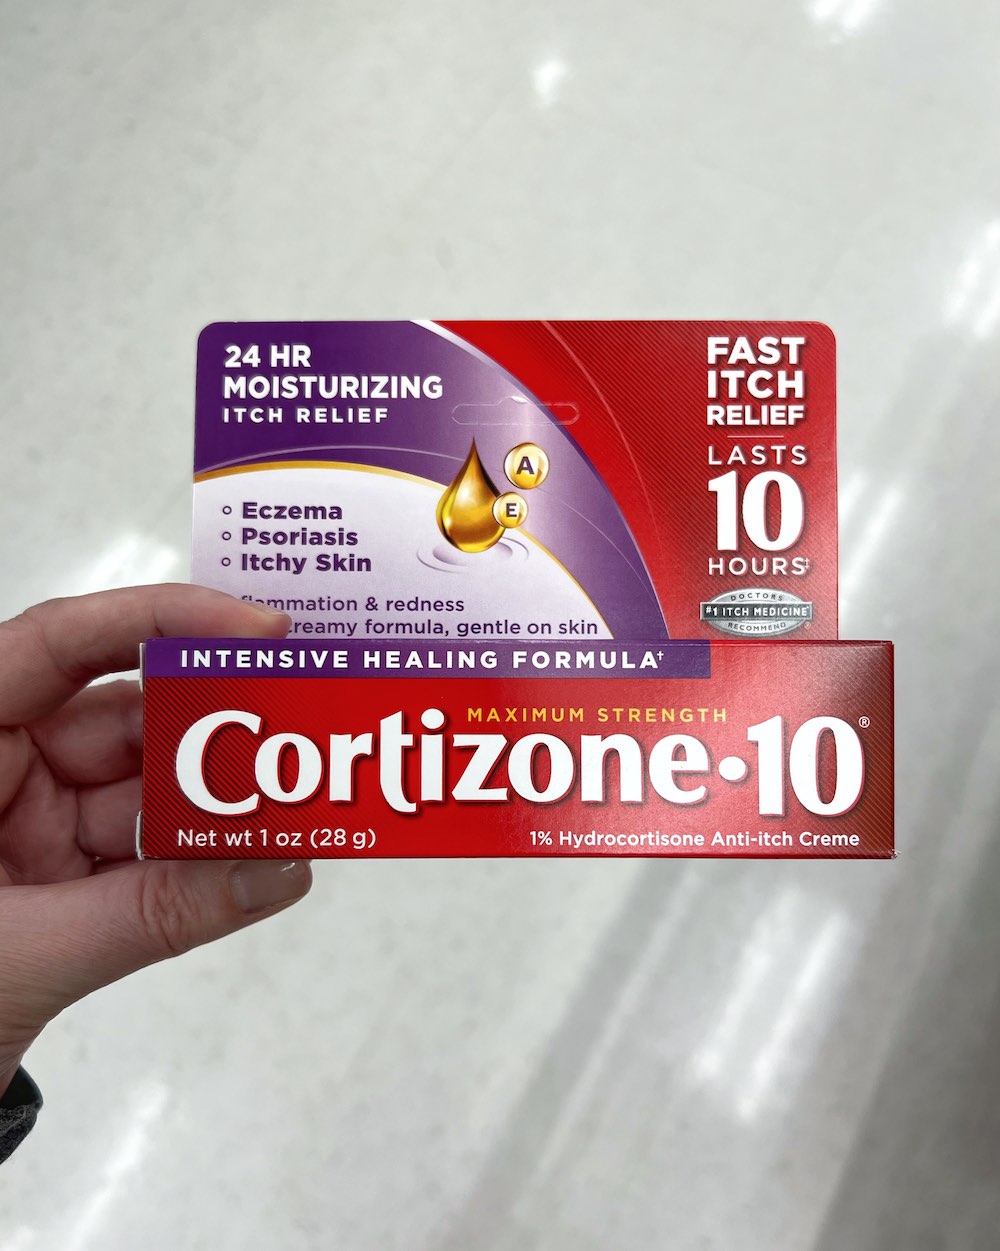 OTC Eczema Products I Was Recommended By Doctors - Cortizone-10